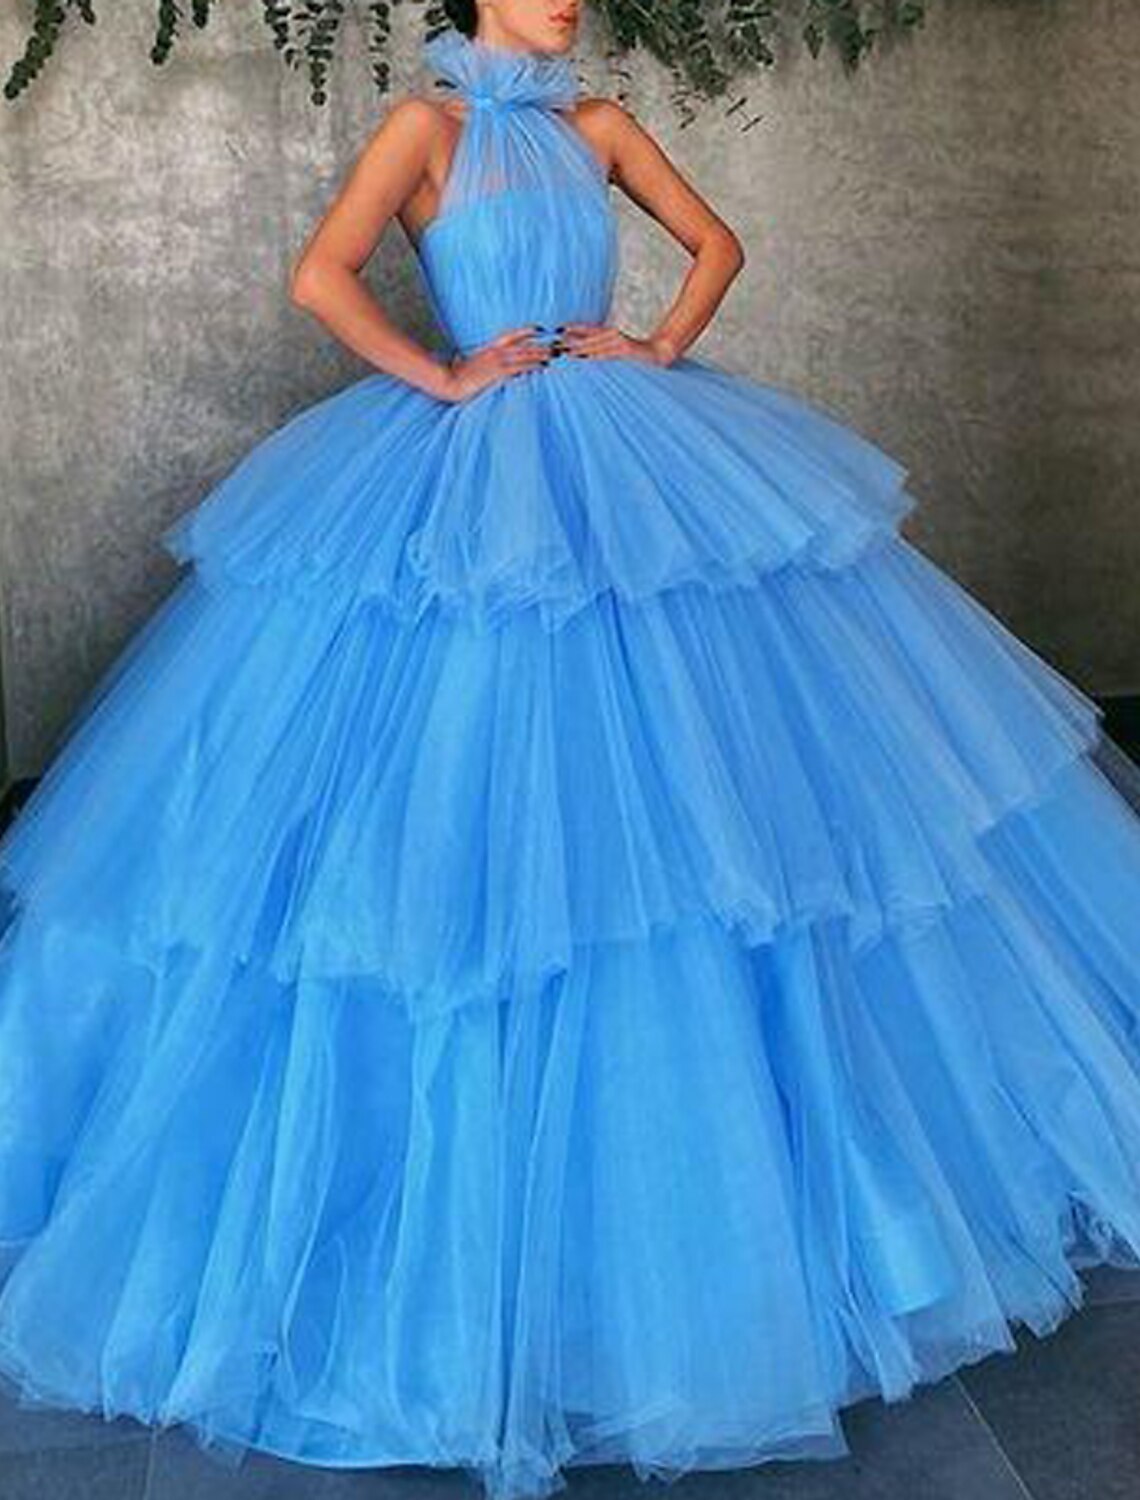 Ball Gown Prom Dresses Luxurious Dress Prom Formal Evening Floor Length Short Sleeve Strapless Tulle with Pleats Tiered